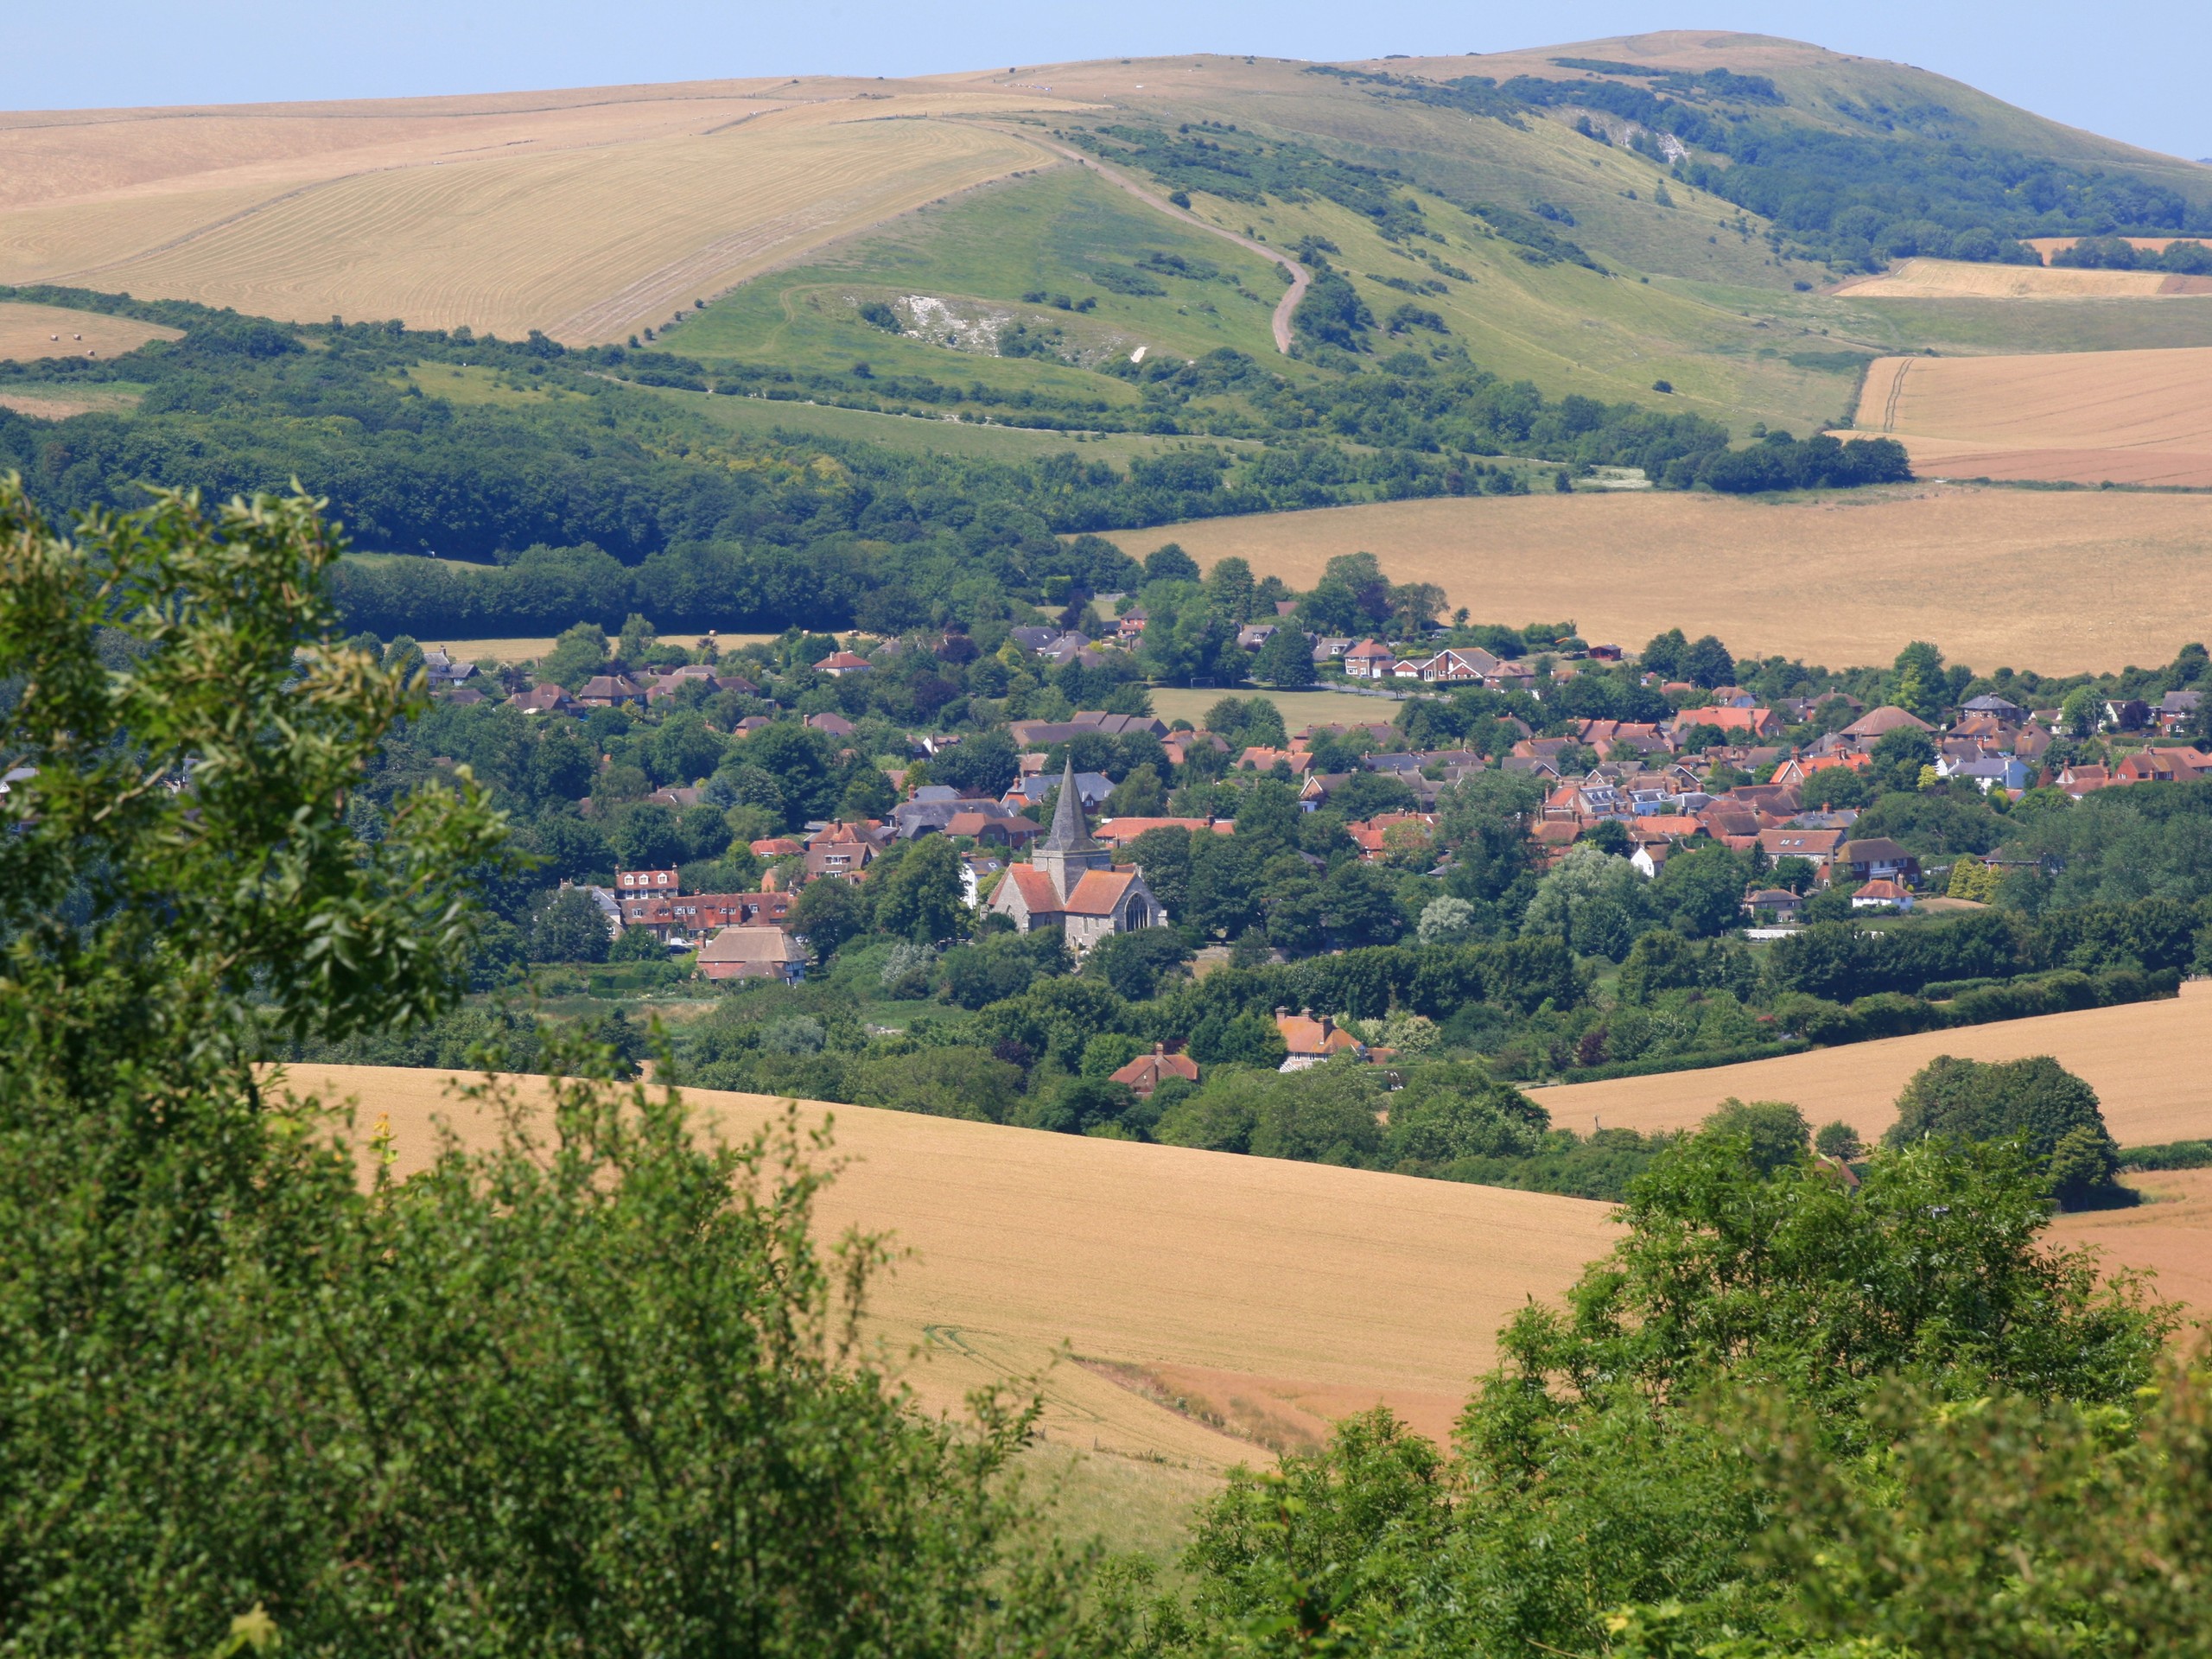 Alfriston nestled in the South Downs